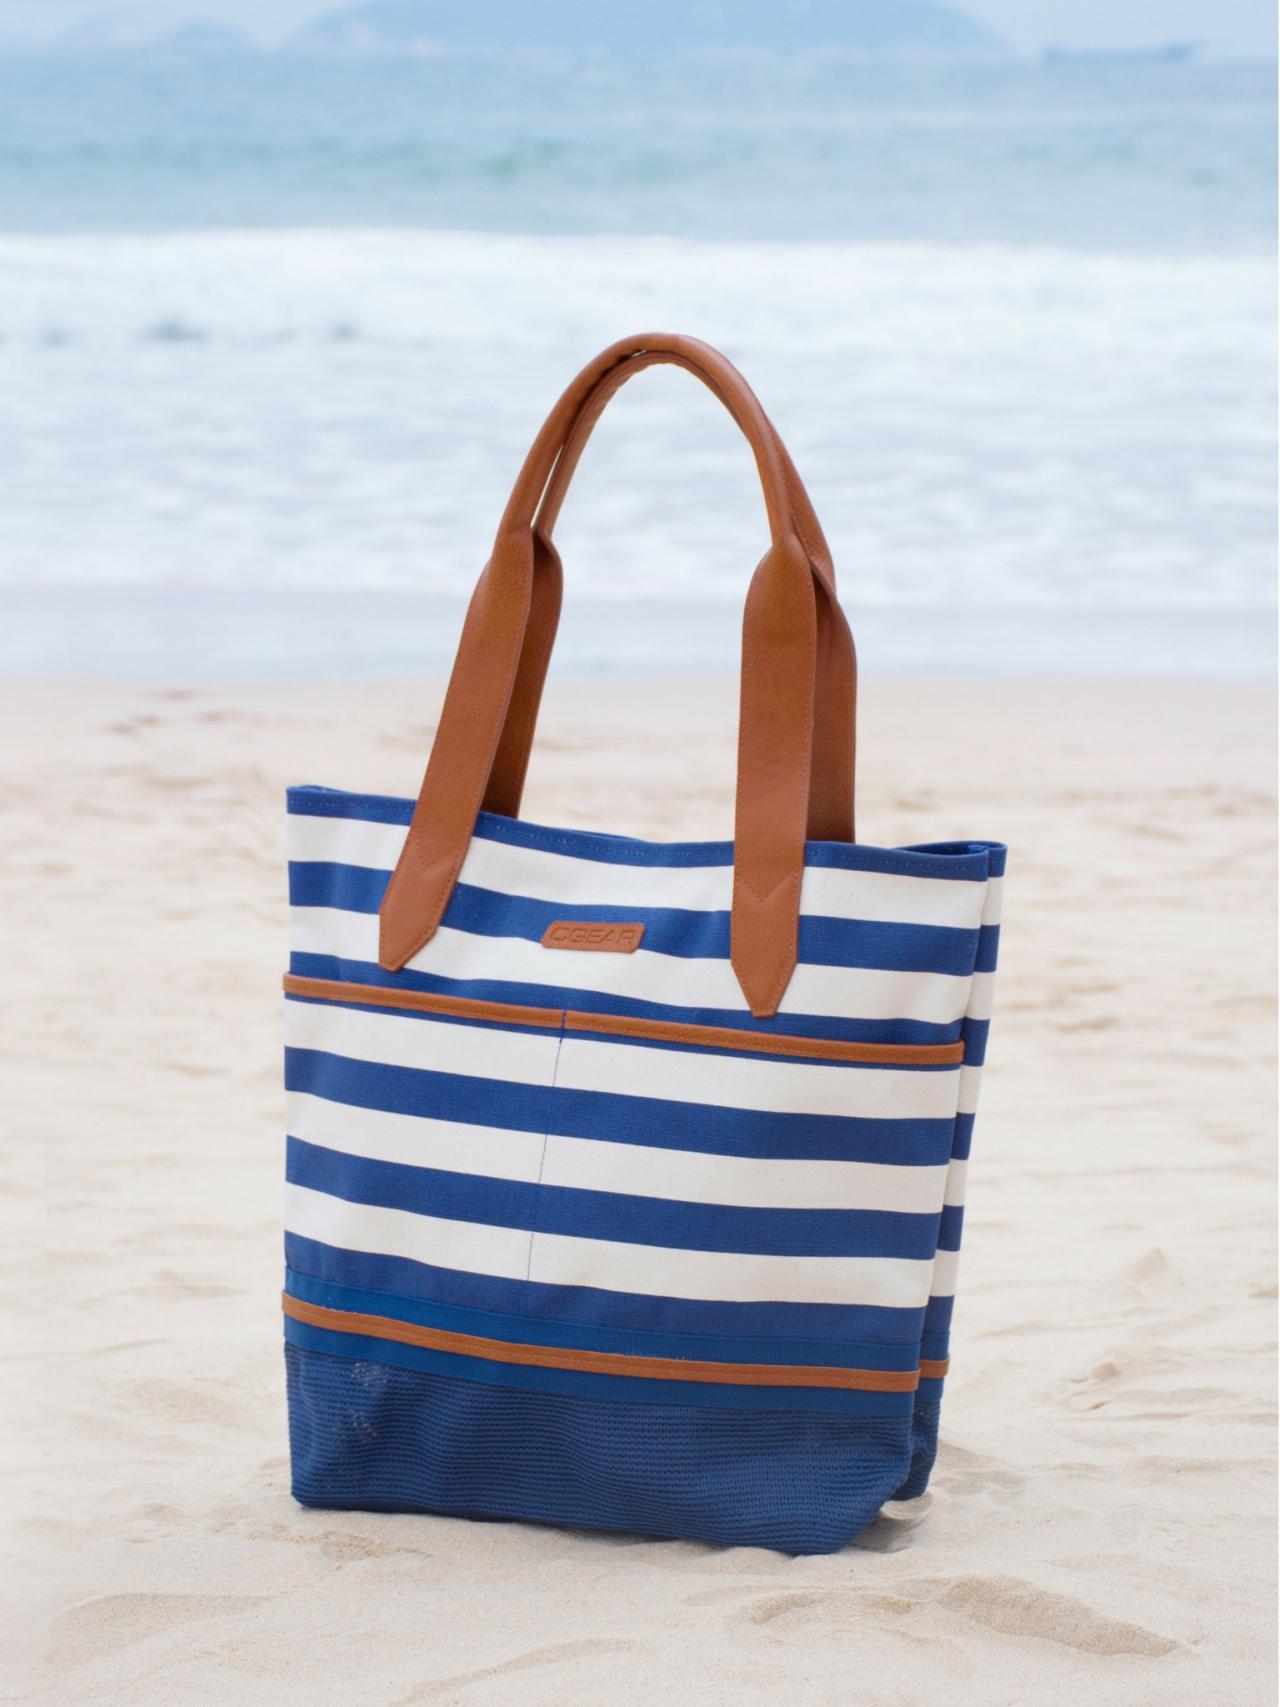 Must-Have Beach Products for Summer | Travel Channel